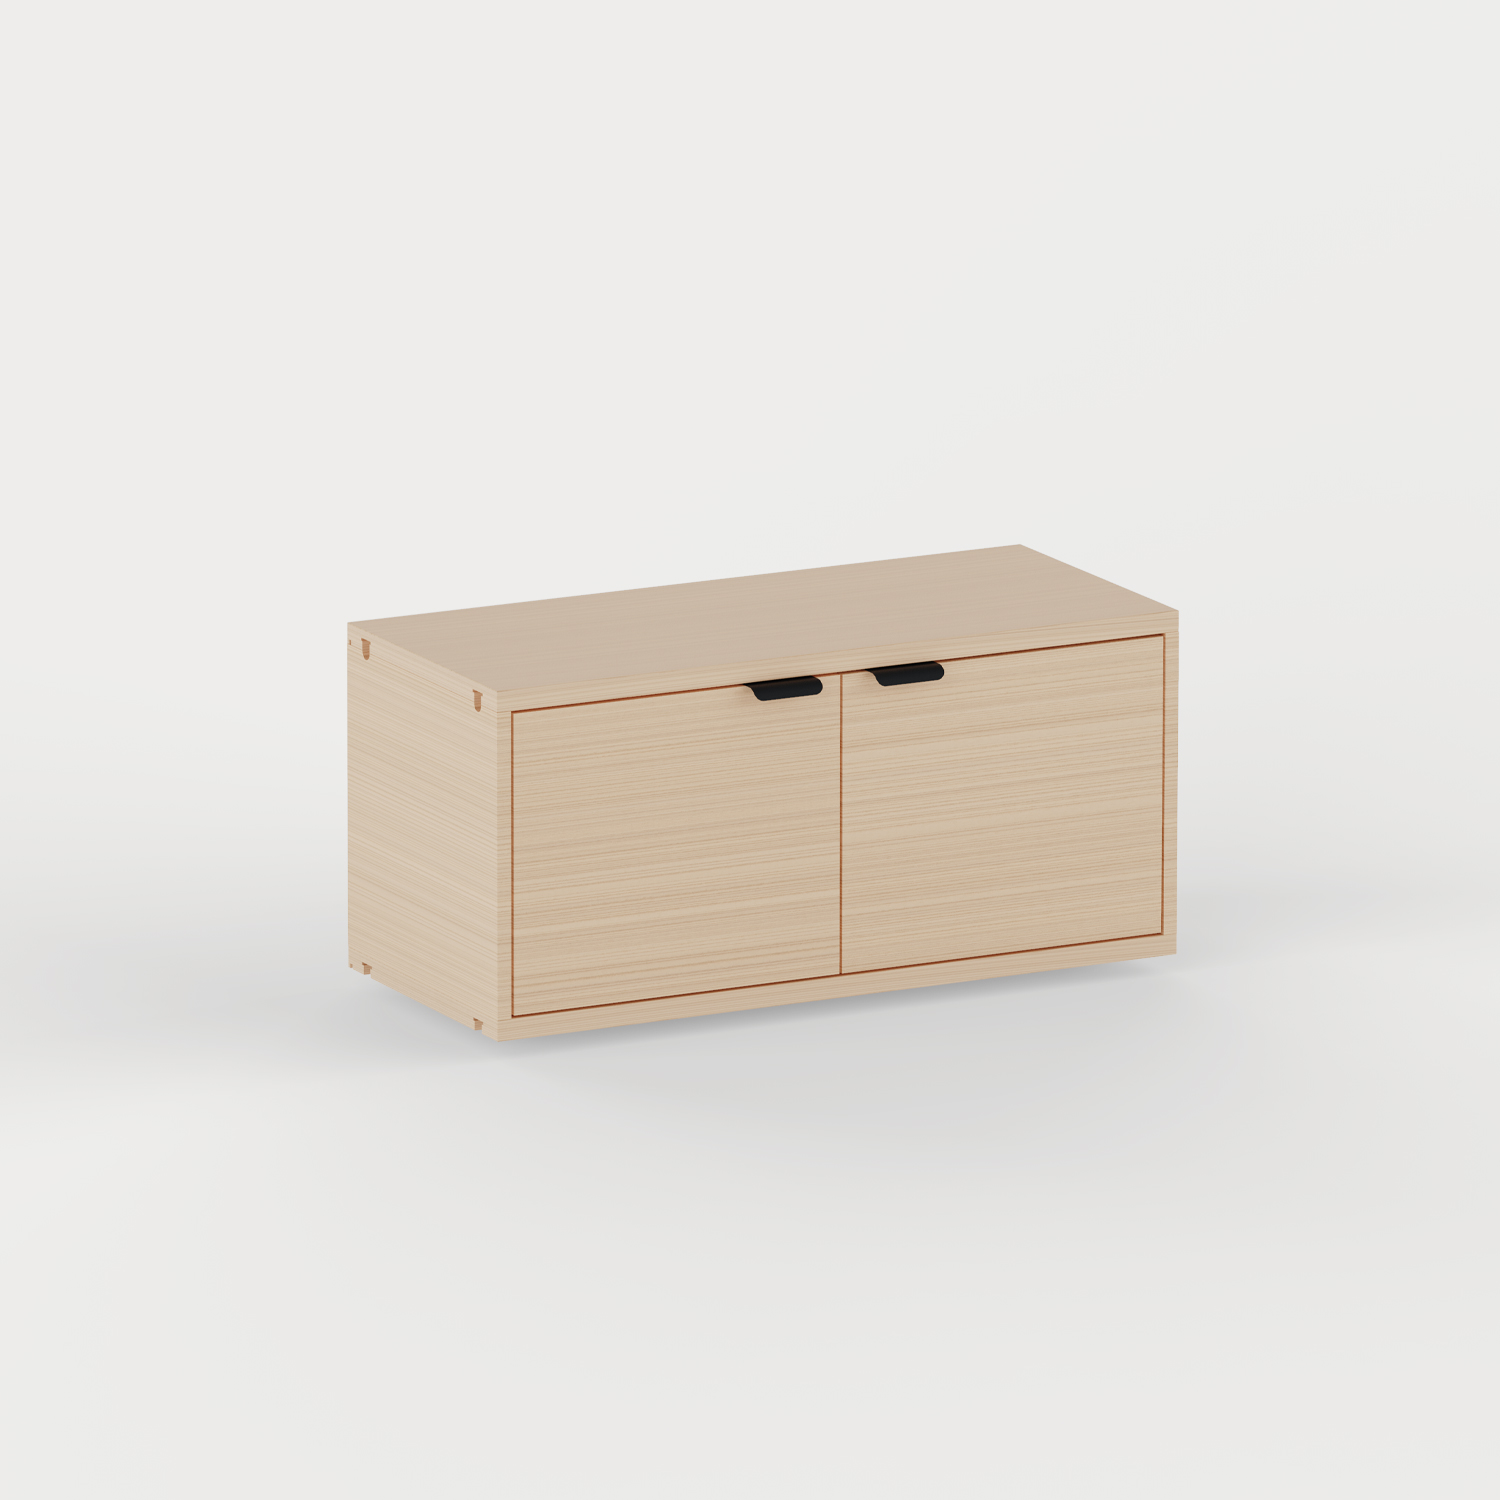 Door and Drawer cabinet - UNIT